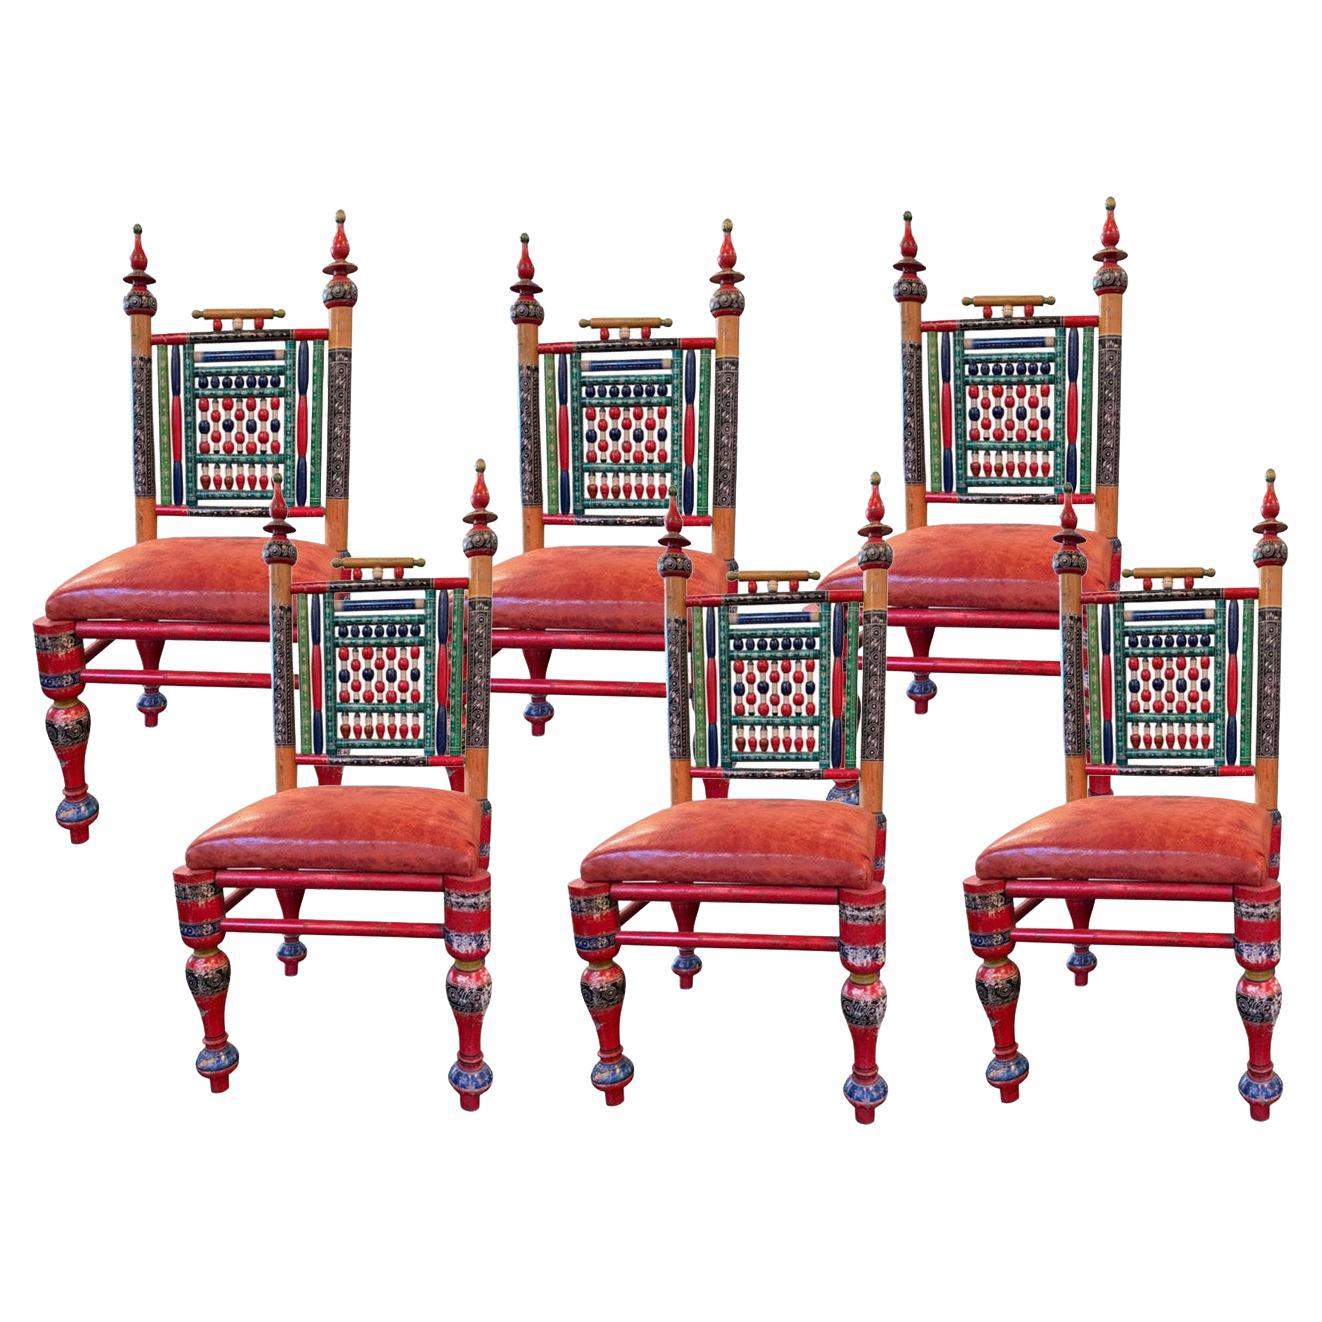 6 Punjabi Indian Chairs, Perhaps Wedding Chairs For Sale